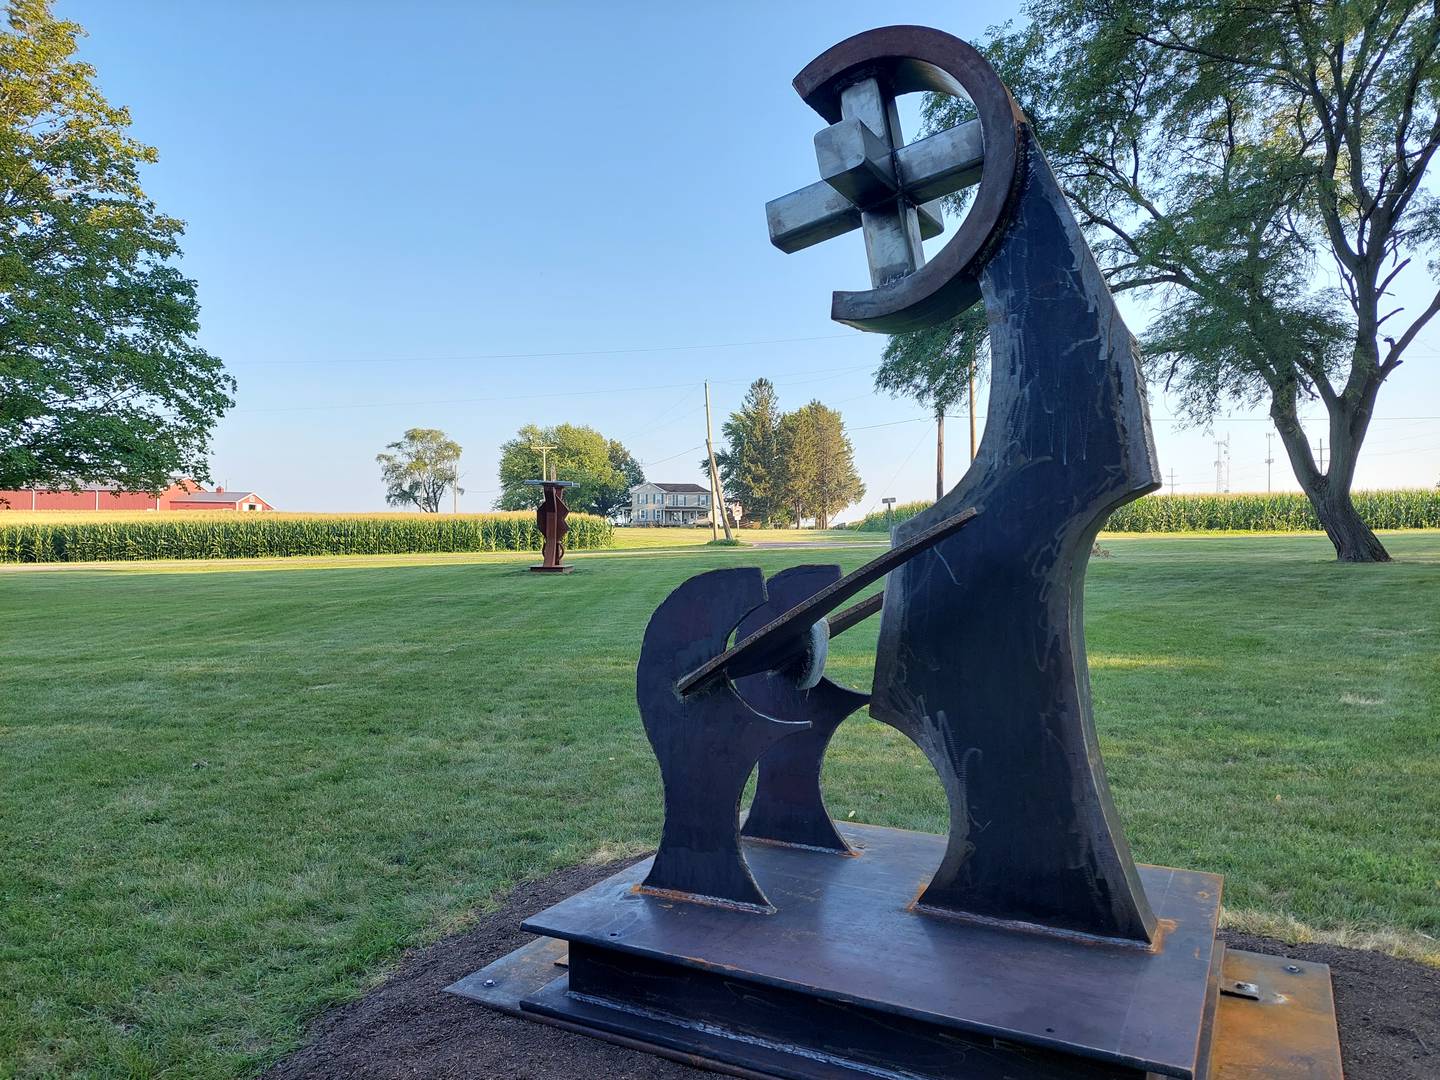 Don Noon's newest sculpture (front) is seen in front of a previous sculpture, both on display at Marilla Park in Streator.